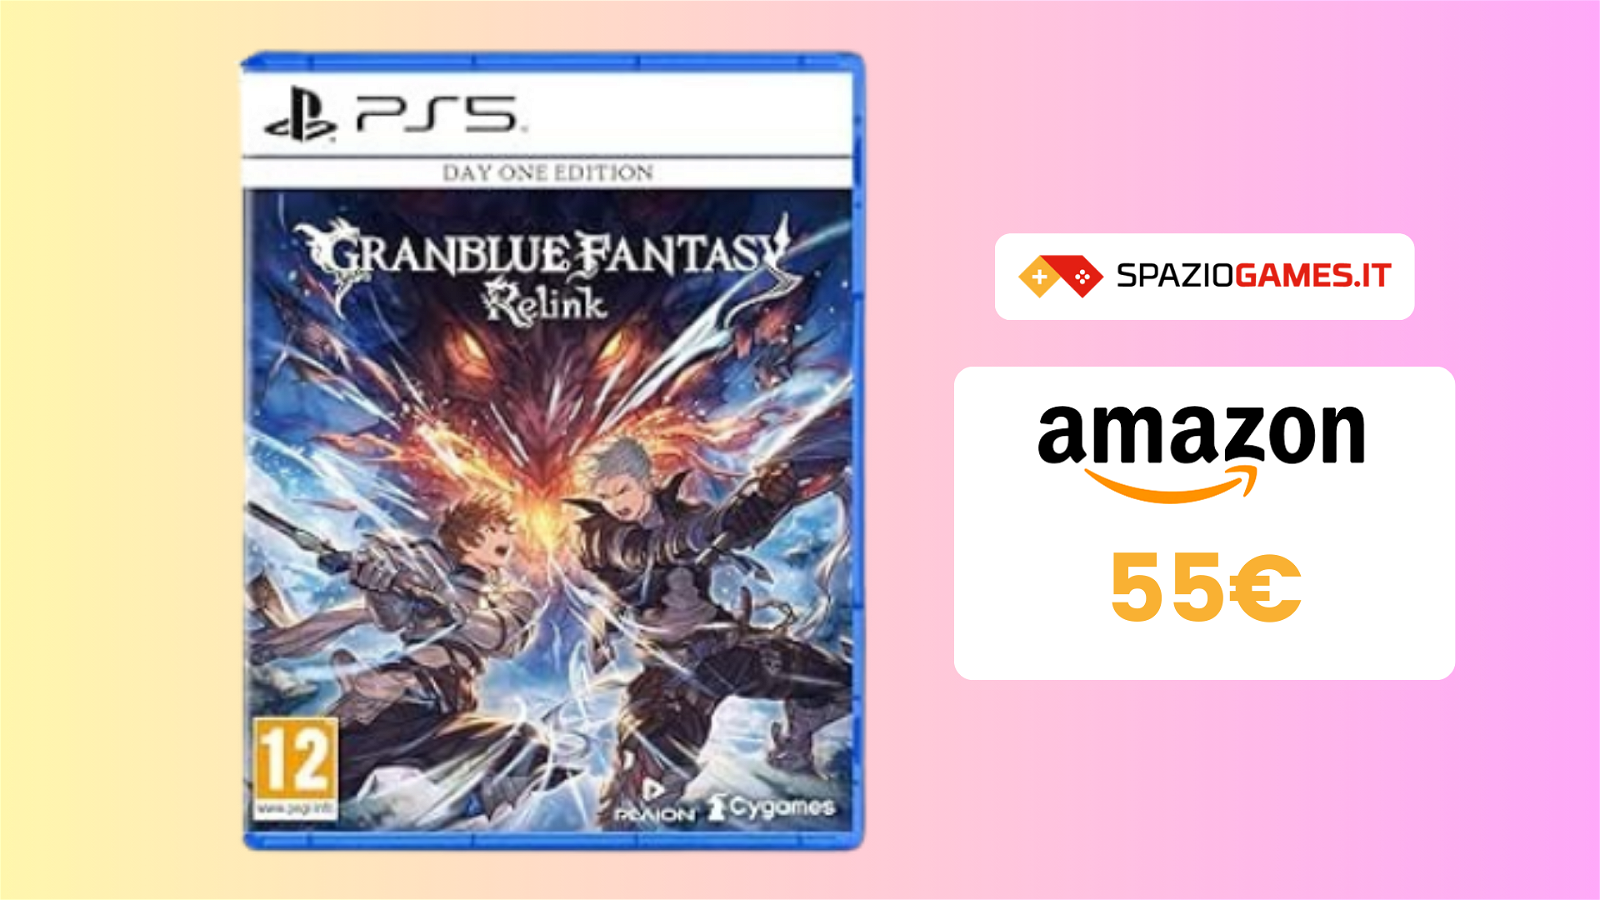 Granblue Fantasy: Relink - Day One Edition per PS5 a 55€!